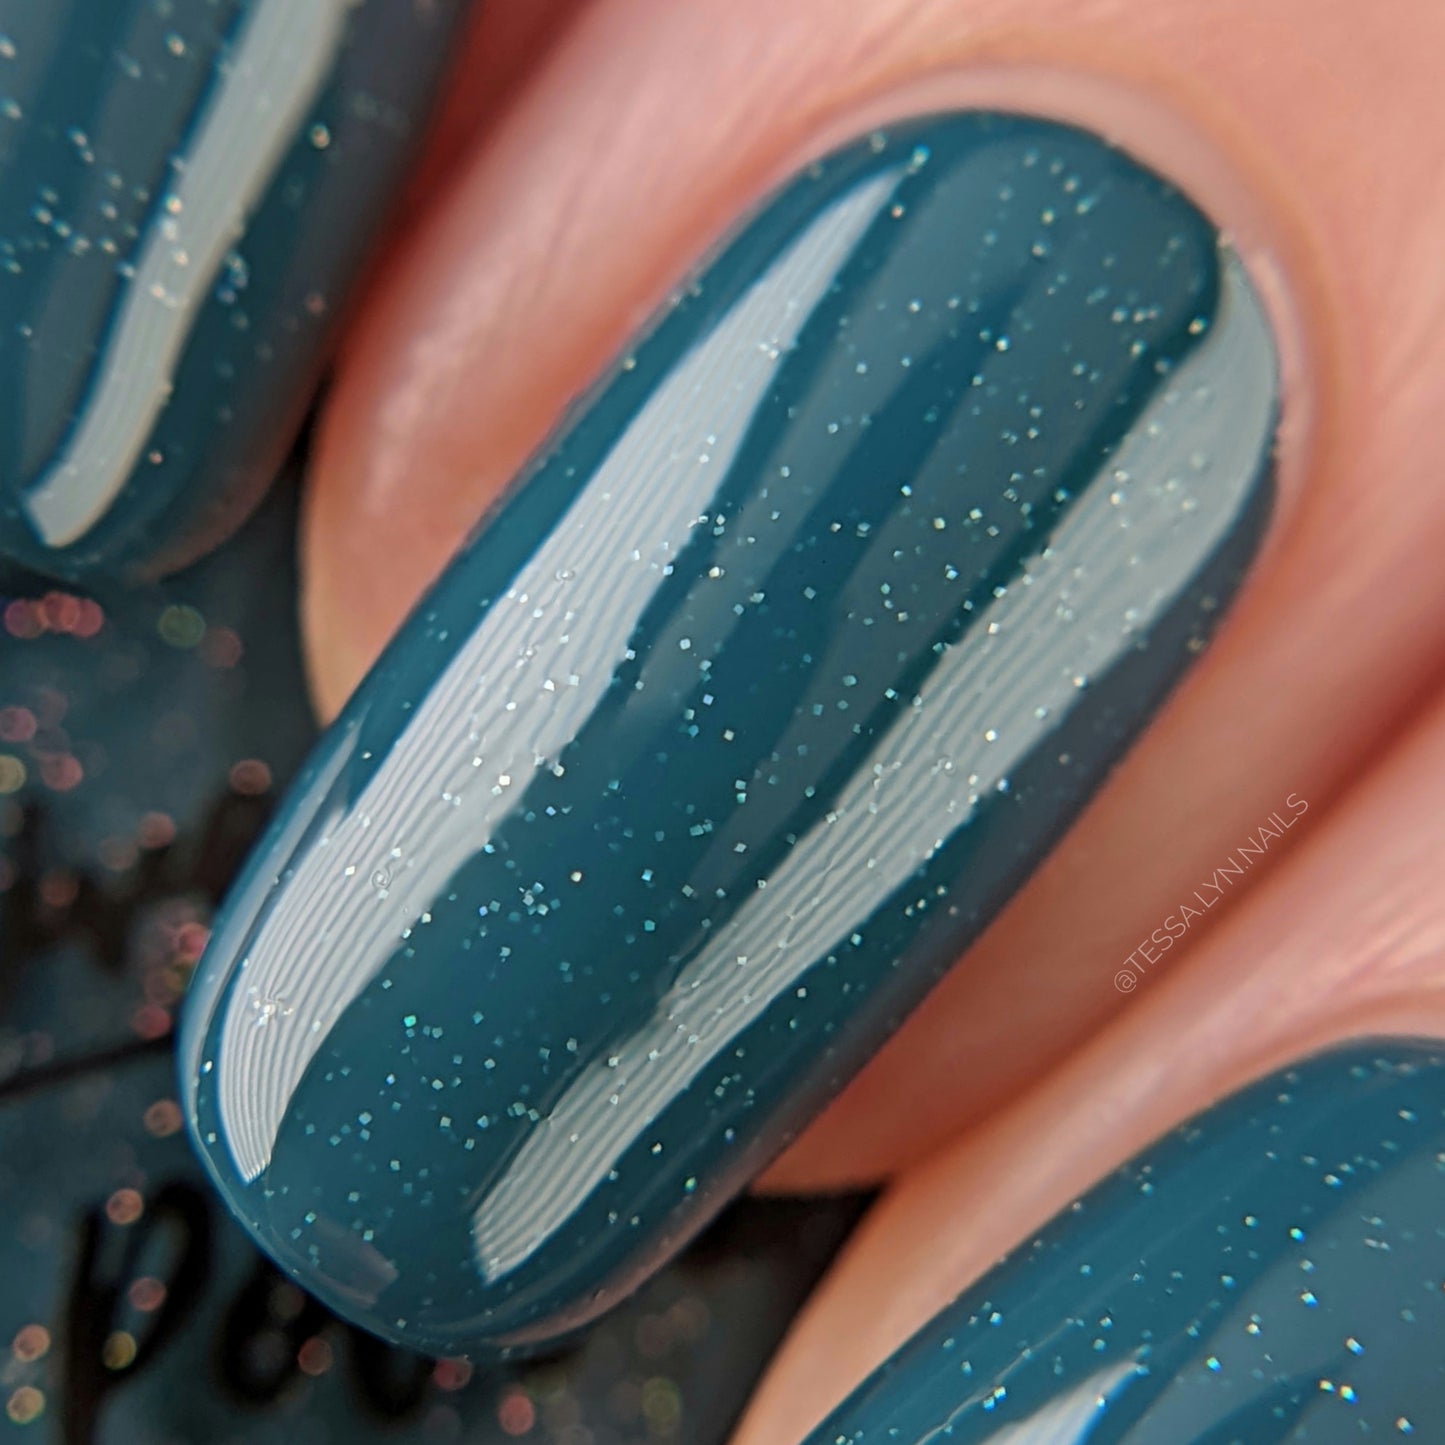 blue holographic nail polish swatch on pale skin tone